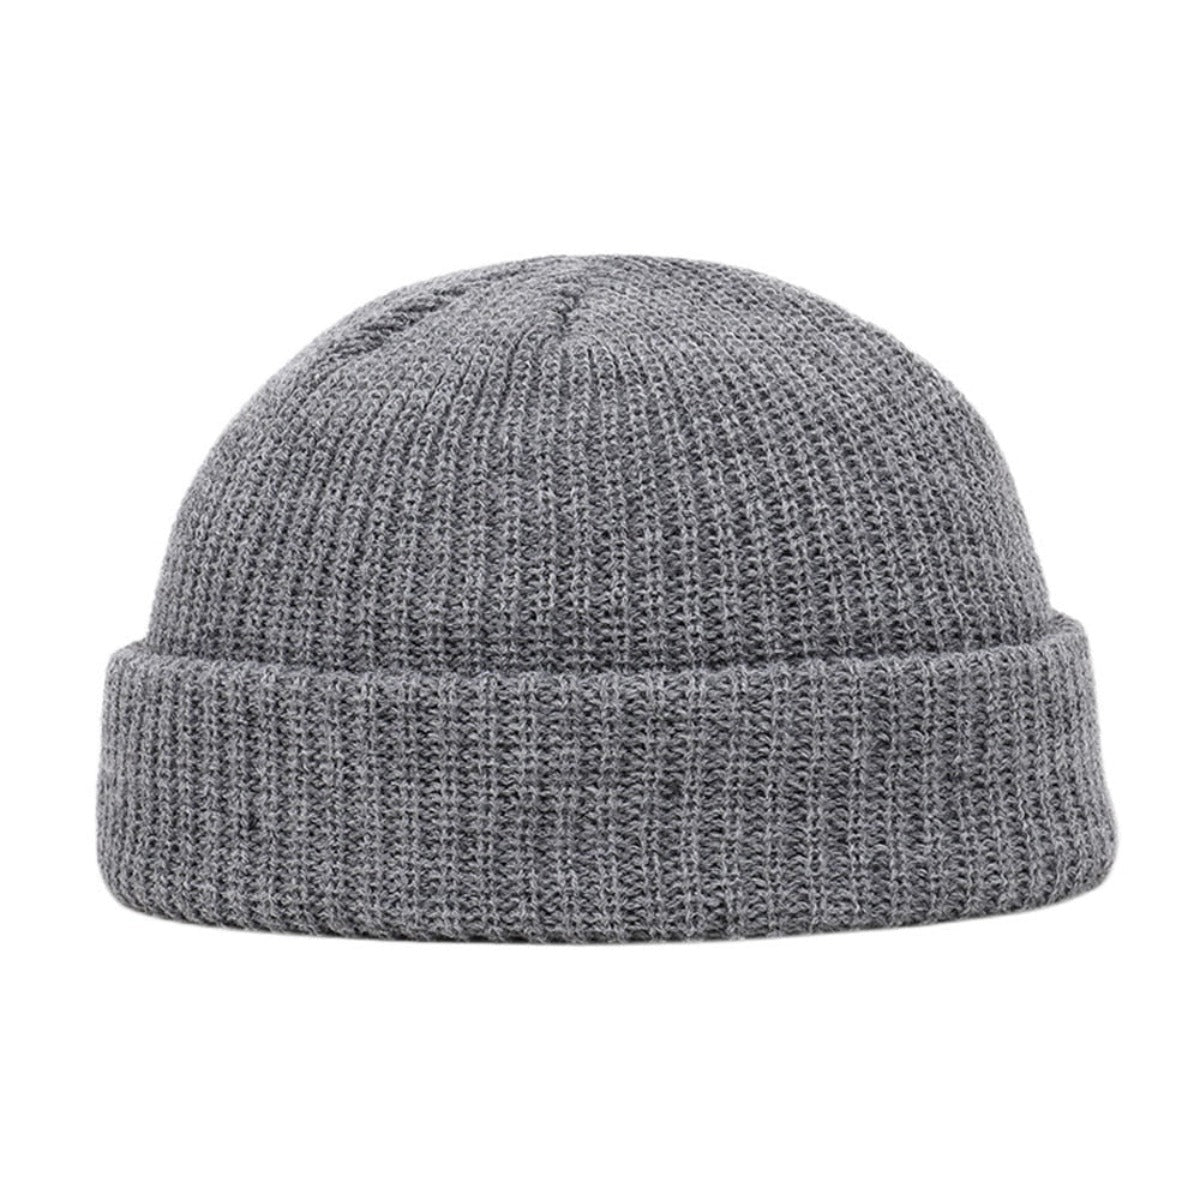 A Wool Knitted Skull Cap Beanie made of grey knit fabric, showcased on a white background.